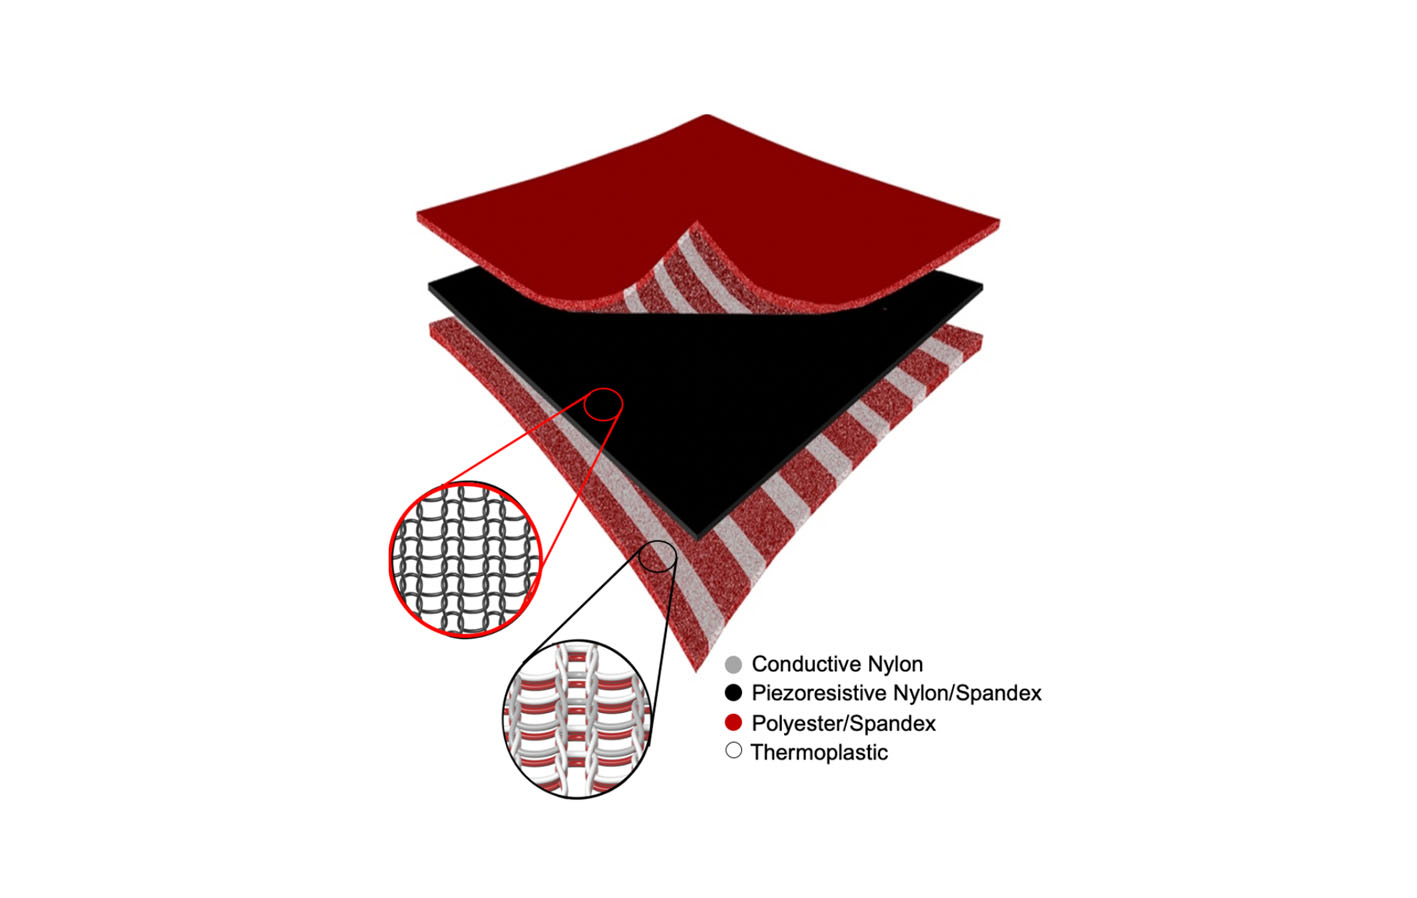 The multilayer knitted textiles are composed of two layers of conductive knitted yarns sandwiched around a piezoresistive later, which changes its resistance when squeezed.